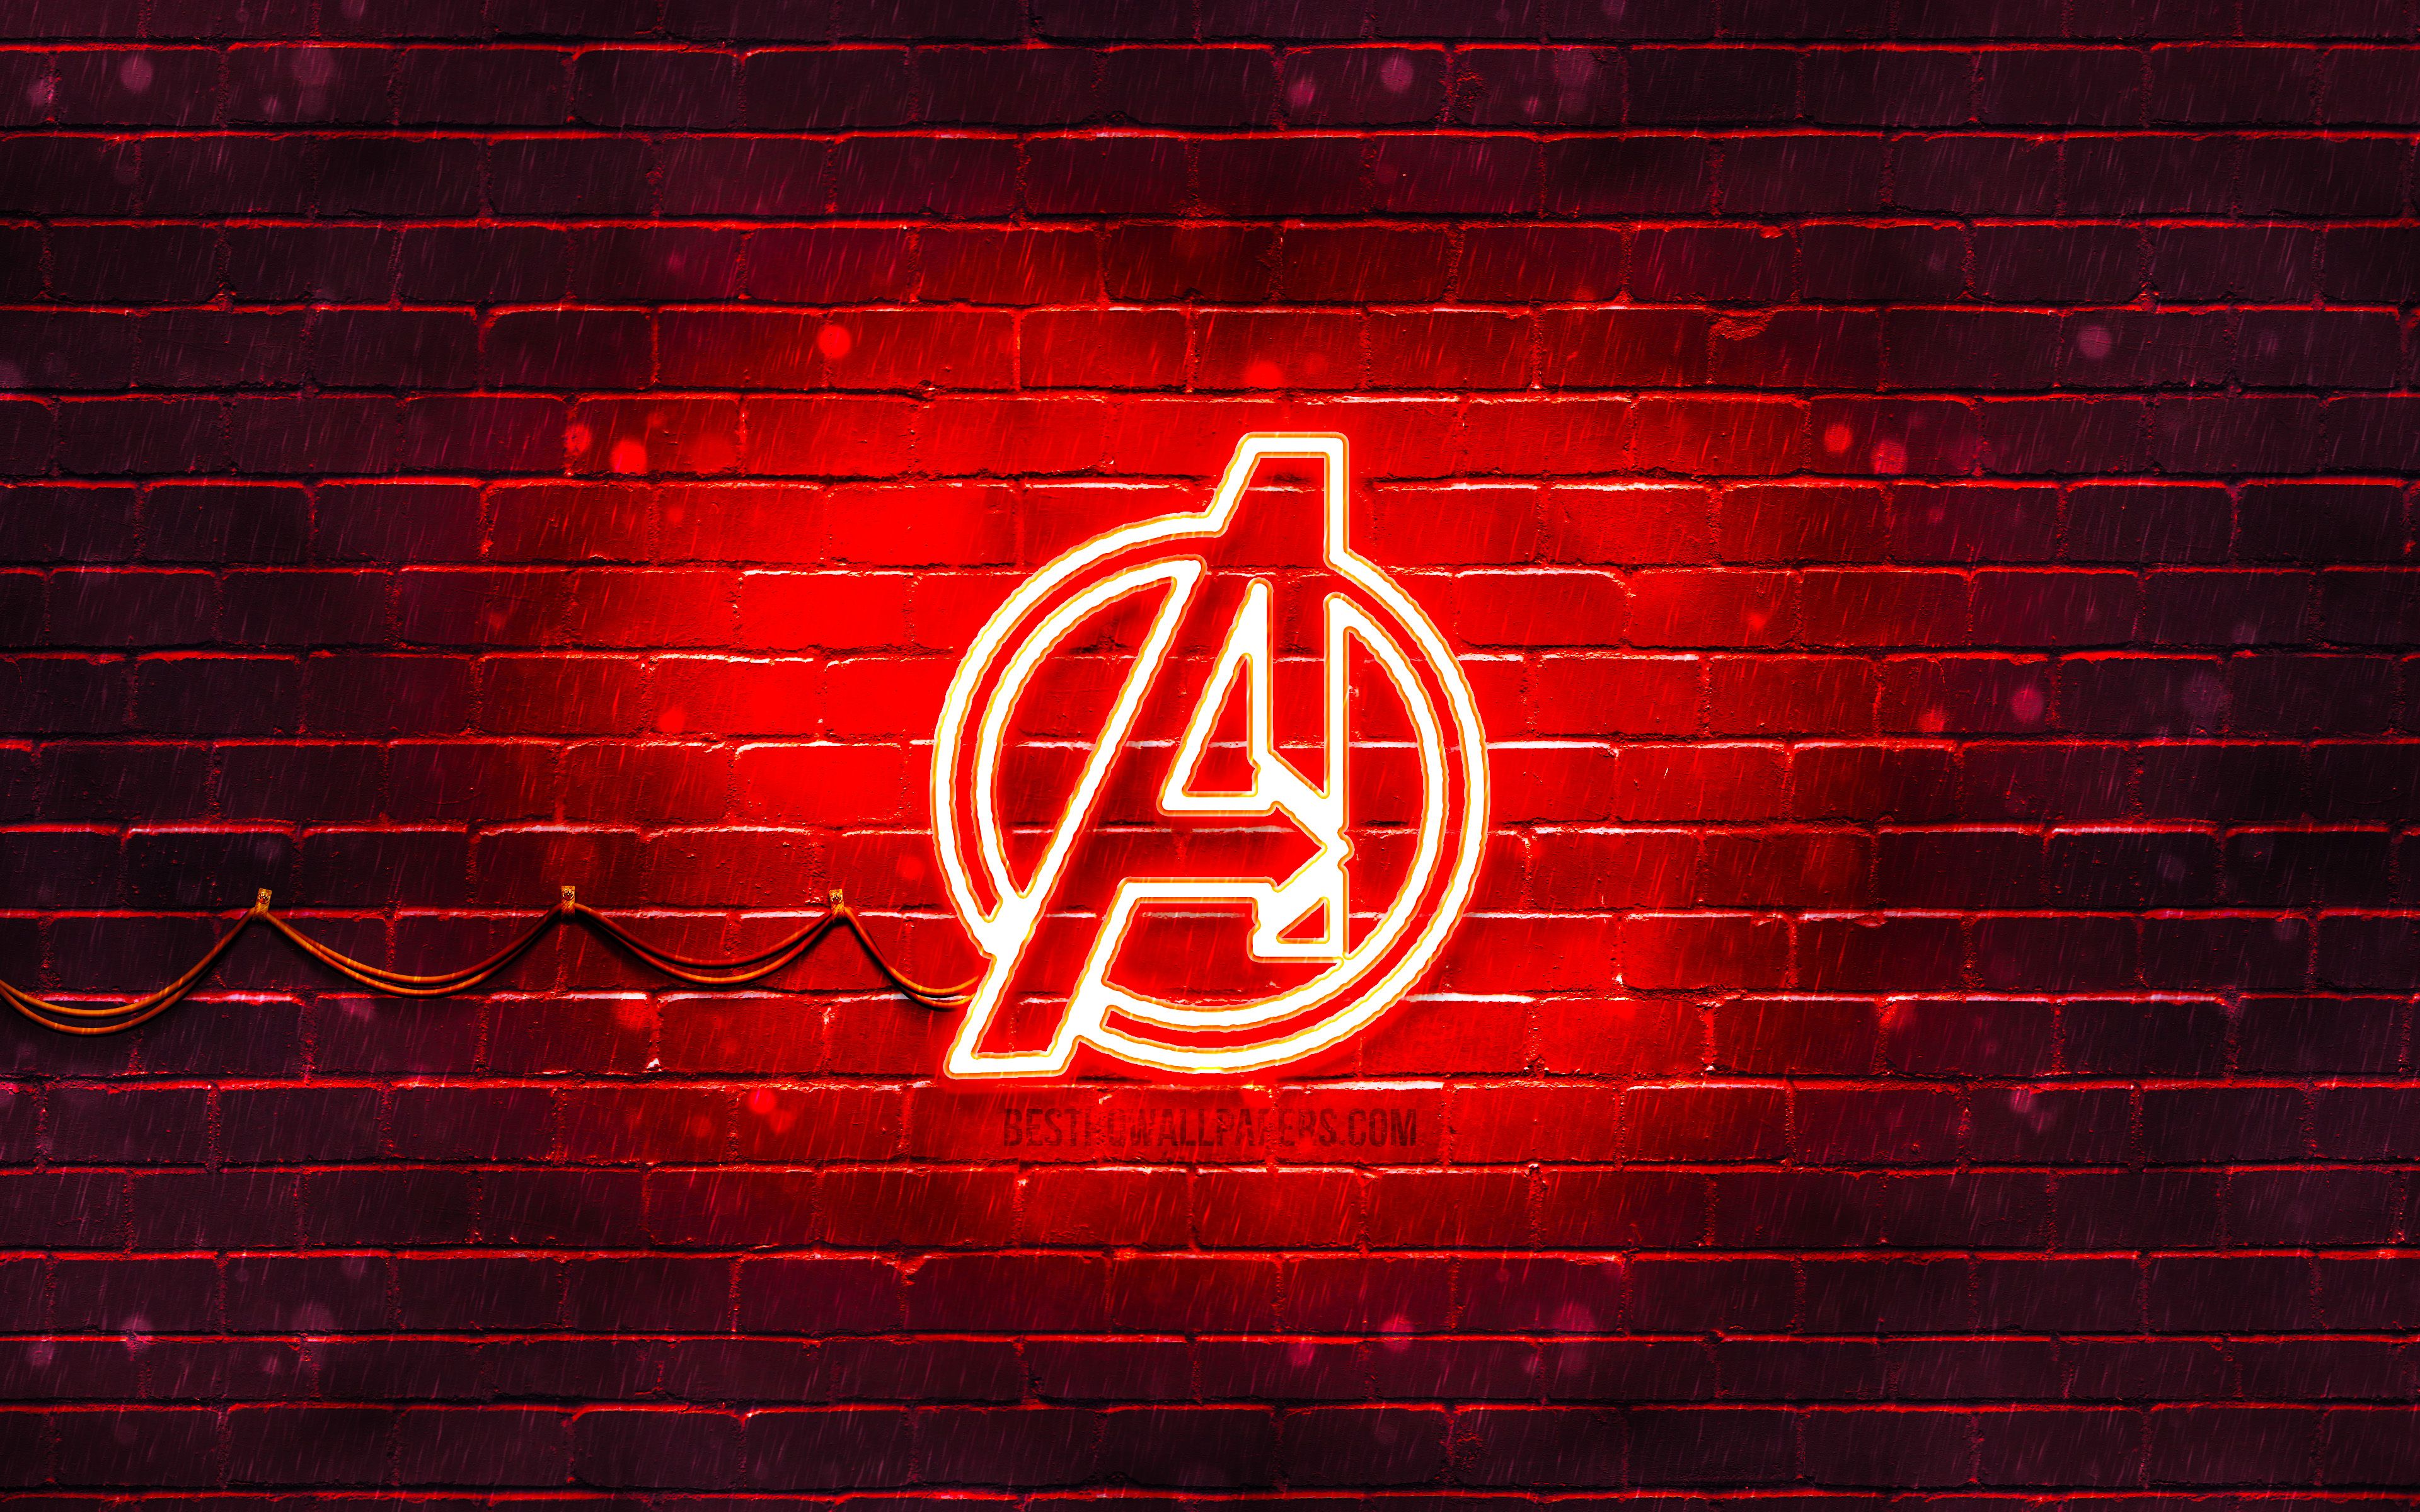 Download wallpaper Avengers red logo, 4k, red brickwall, Avengers logo, superheroes, Avengers neon logo, Avengers for desktop with resolution 3840x2400. High Quality HD picture wallpaper